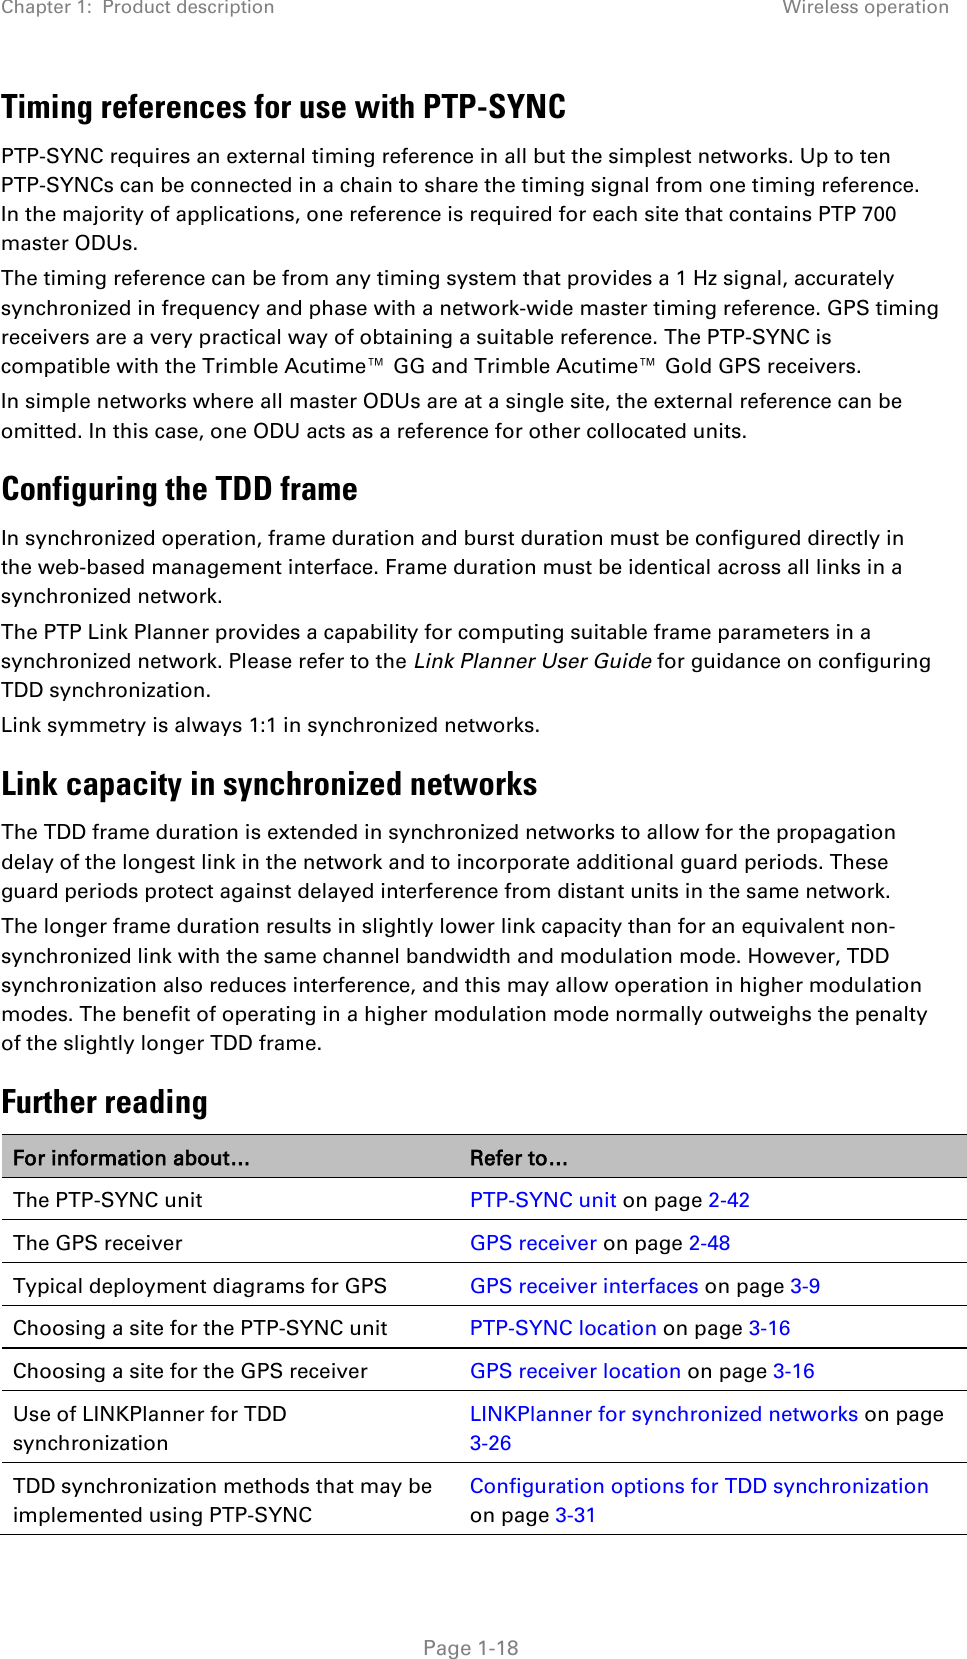 Chapter 1:  Product description Wireless operation  Timing references for use with PTP-SYNC PTP-SYNC requires an external timing reference in all but the simplest networks. Up to ten PTP-SYNCs can be connected in a chain to share the timing signal from one timing reference. In the majority of applications, one reference is required for each site that contains PTP 700 master ODUs. The timing reference can be from any timing system that provides a 1 Hz signal, accurately synchronized in frequency and phase with a network-wide master timing reference. GPS timing receivers are a very practical way of obtaining a suitable reference. The PTP-SYNC is compatible with the Trimble Acutime™ GG and Trimble Acutime™ Gold GPS receivers. In simple networks where all master ODUs are at a single site, the external reference can be omitted. In this case, one ODU acts as a reference for other collocated units. Configuring the TDD frame In synchronized operation, frame duration and burst duration must be configured directly in the web-based management interface. Frame duration must be identical across all links in a synchronized network. The PTP Link Planner provides a capability for computing suitable frame parameters in a synchronized network. Please refer to the Link Planner User Guide for guidance on configuring TDD synchronization. Link symmetry is always 1:1 in synchronized networks. Link capacity in synchronized networks The TDD frame duration is extended in synchronized networks to allow for the propagation delay of the longest link in the network and to incorporate additional guard periods. These guard periods protect against delayed interference from distant units in the same network. The longer frame duration results in slightly lower link capacity than for an equivalent non-synchronized link with the same channel bandwidth and modulation mode. However, TDD synchronization also reduces interference, and this may allow operation in higher modulation modes. The benefit of operating in a higher modulation mode normally outweighs the penalty of the slightly longer TDD frame. Further reading For information about… Refer to… The PTP-SYNC unit PTP-SYNC unit on page 2-42 The GPS receiver GPS receiver on page 2-48 Typical deployment diagrams for GPS GPS receiver interfaces on page 3-9 Choosing a site for the PTP-SYNC unit PTP-SYNC location on page 3-16 Choosing a site for the GPS receiver GPS receiver location on page 3-16 Use of LINKPlanner for TDD synchronization LINKPlanner for synchronized networks on page 3-26 TDD synchronization methods that may be implemented using PTP-SYNC Configuration options for TDD synchronization on page 3-31  Page 1-18 